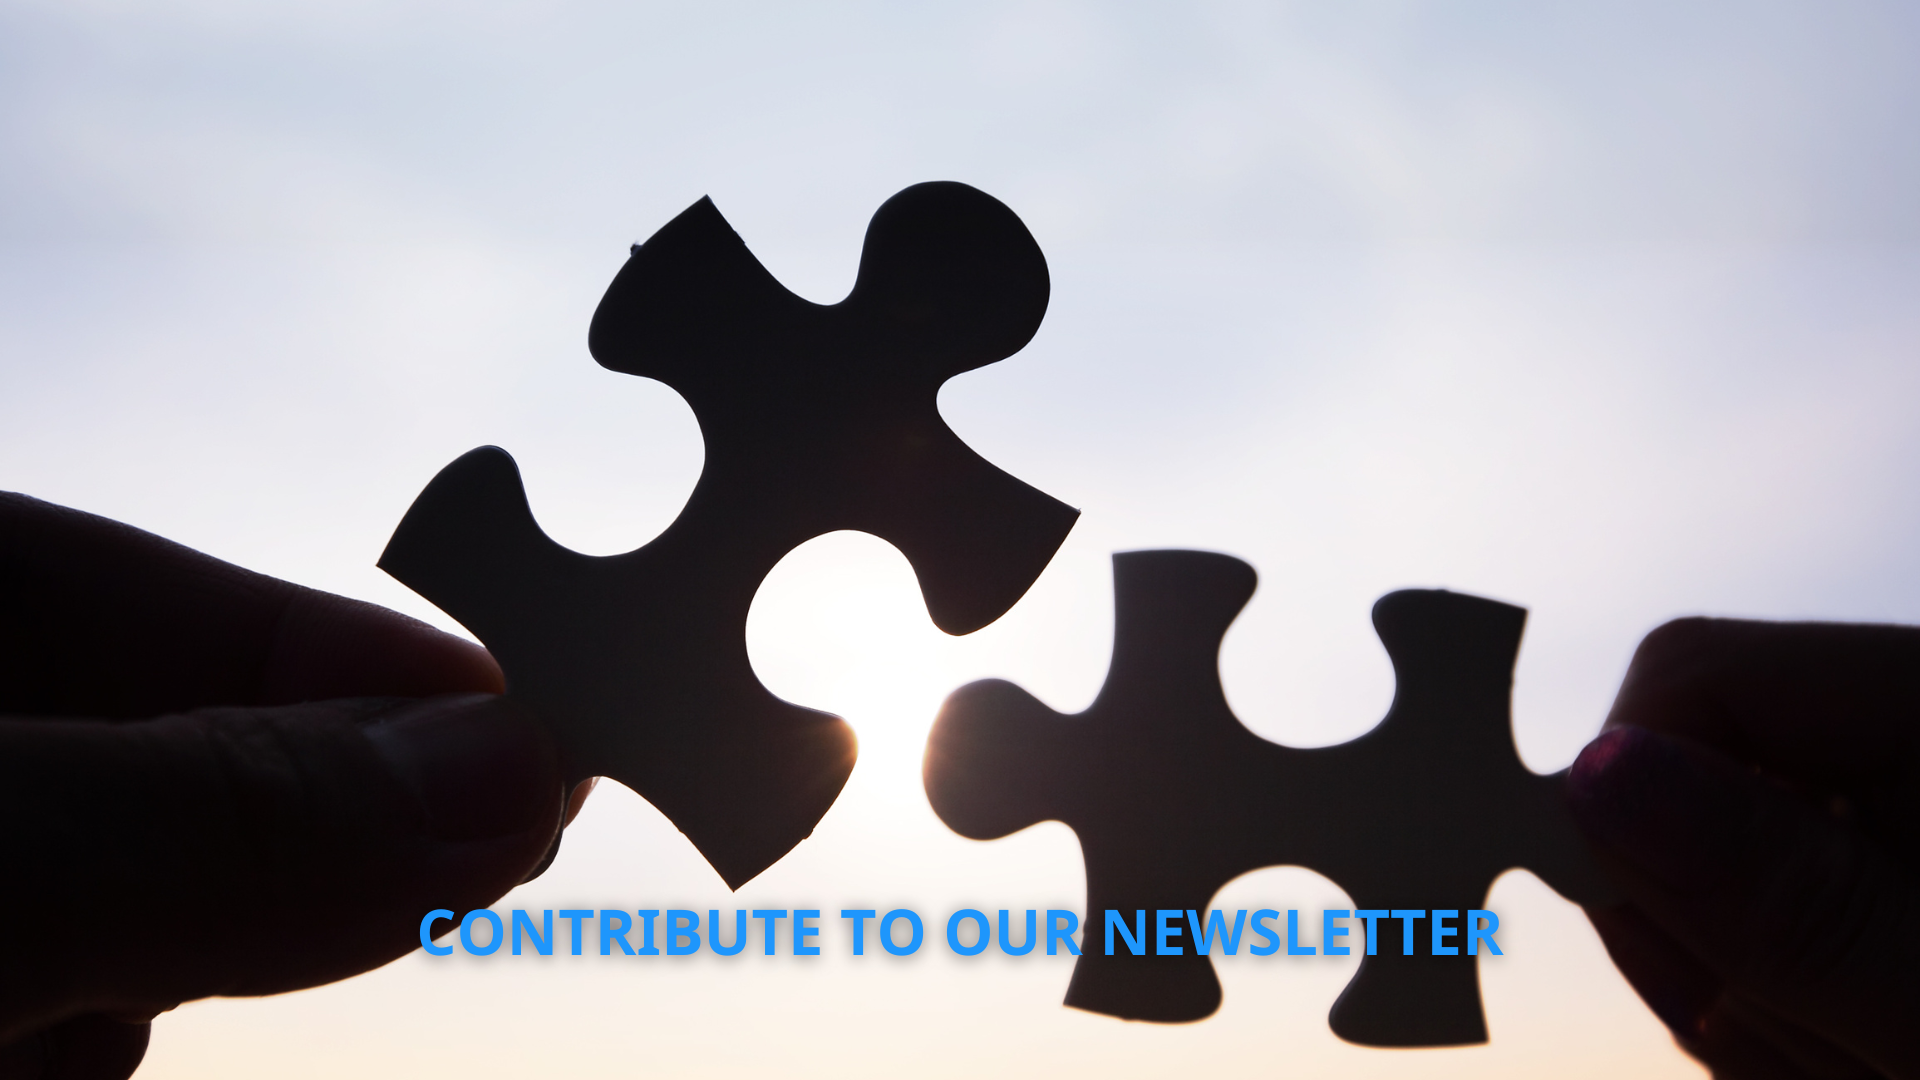 Contribute to your newsletter